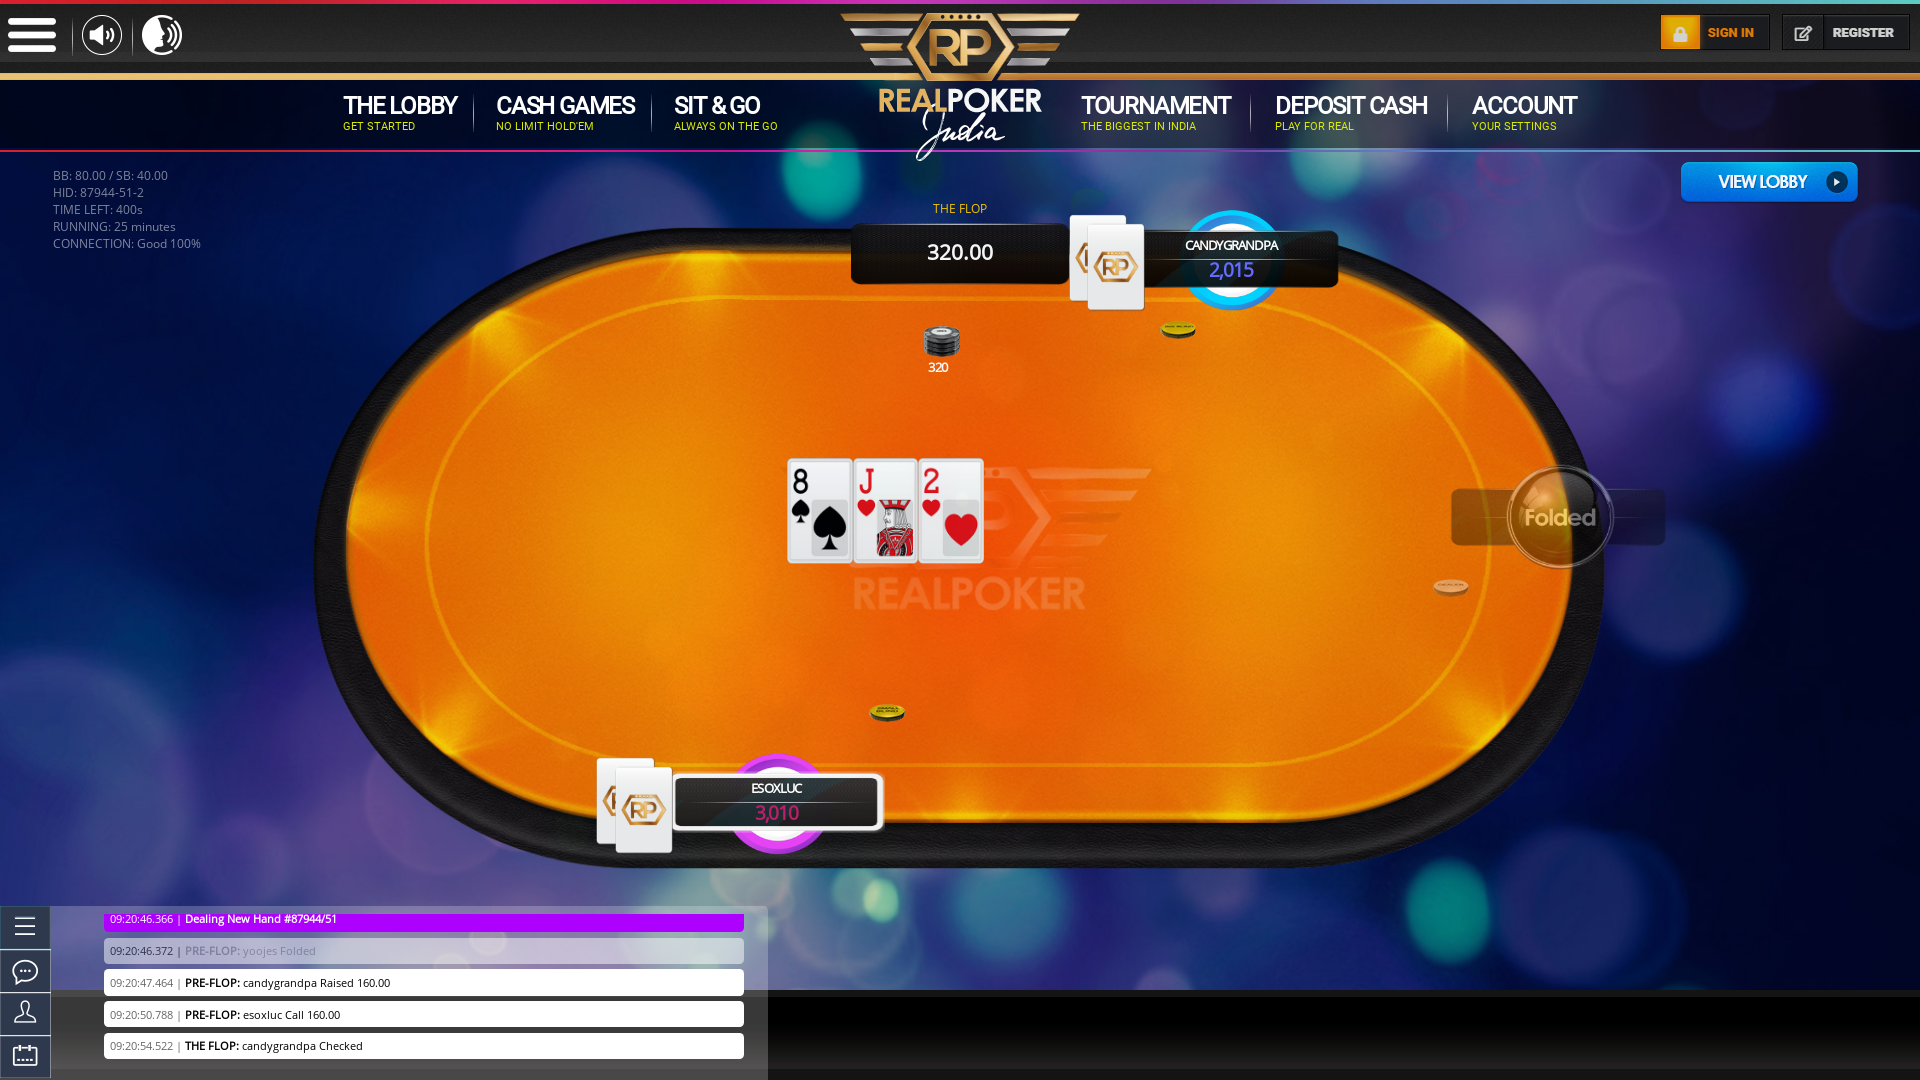 Indian 6 player poker in the 25th minute